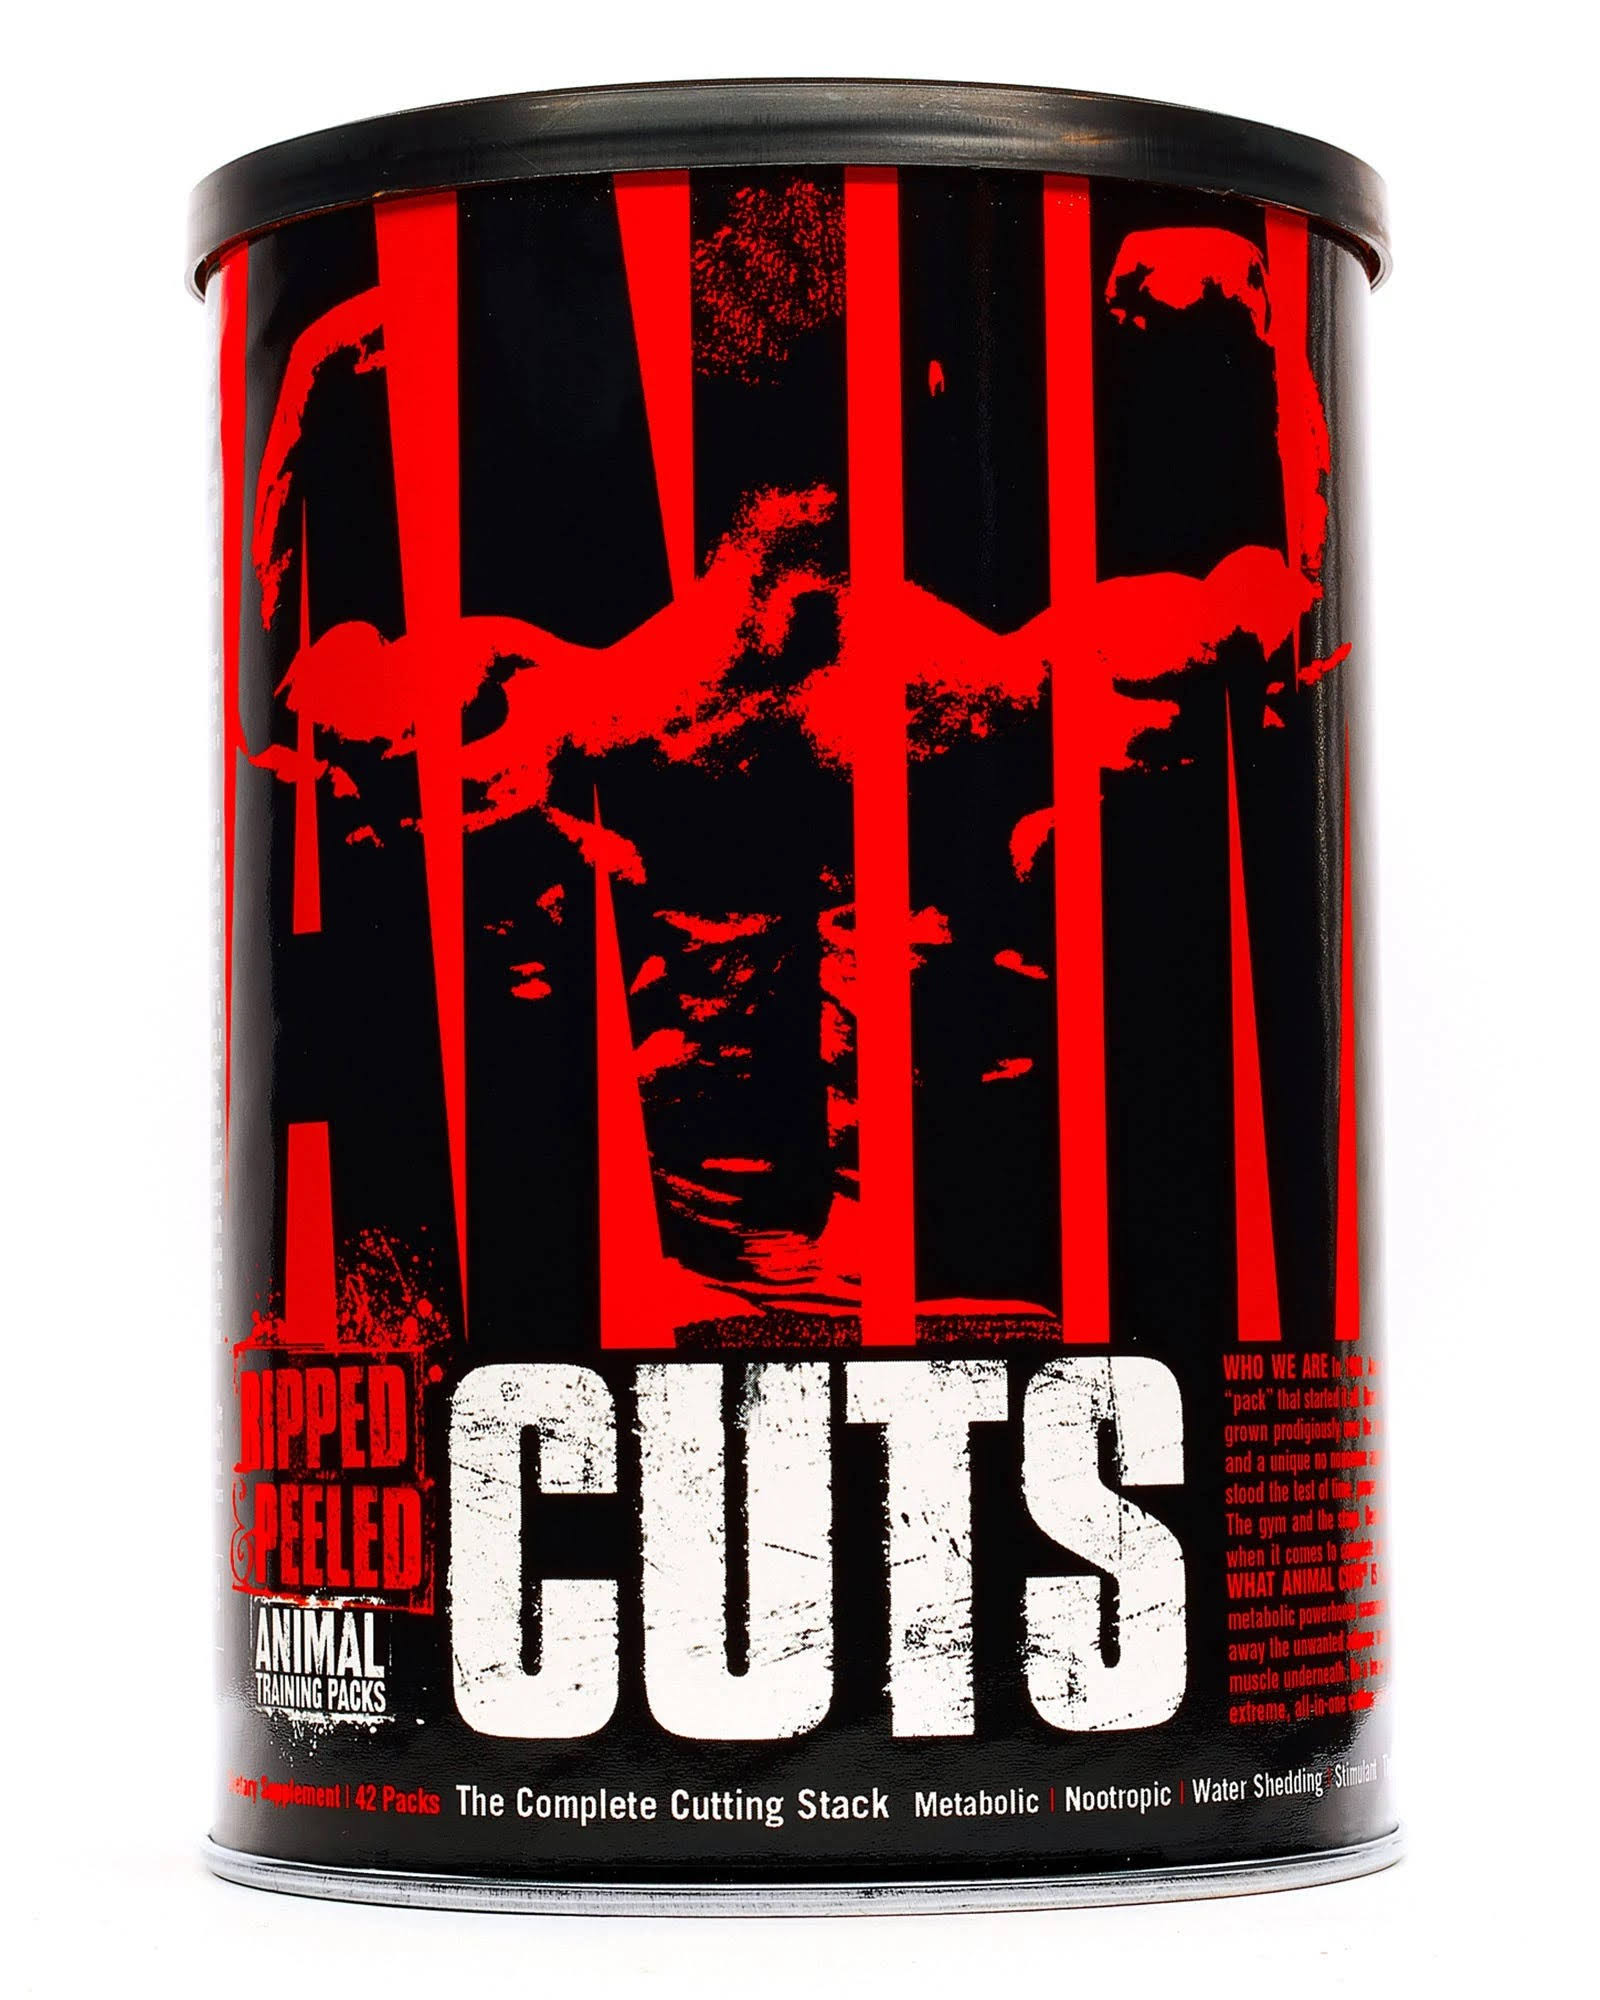 Universal Nutrition Animal Cuts, Ripped and Peeled Animal Training Packs